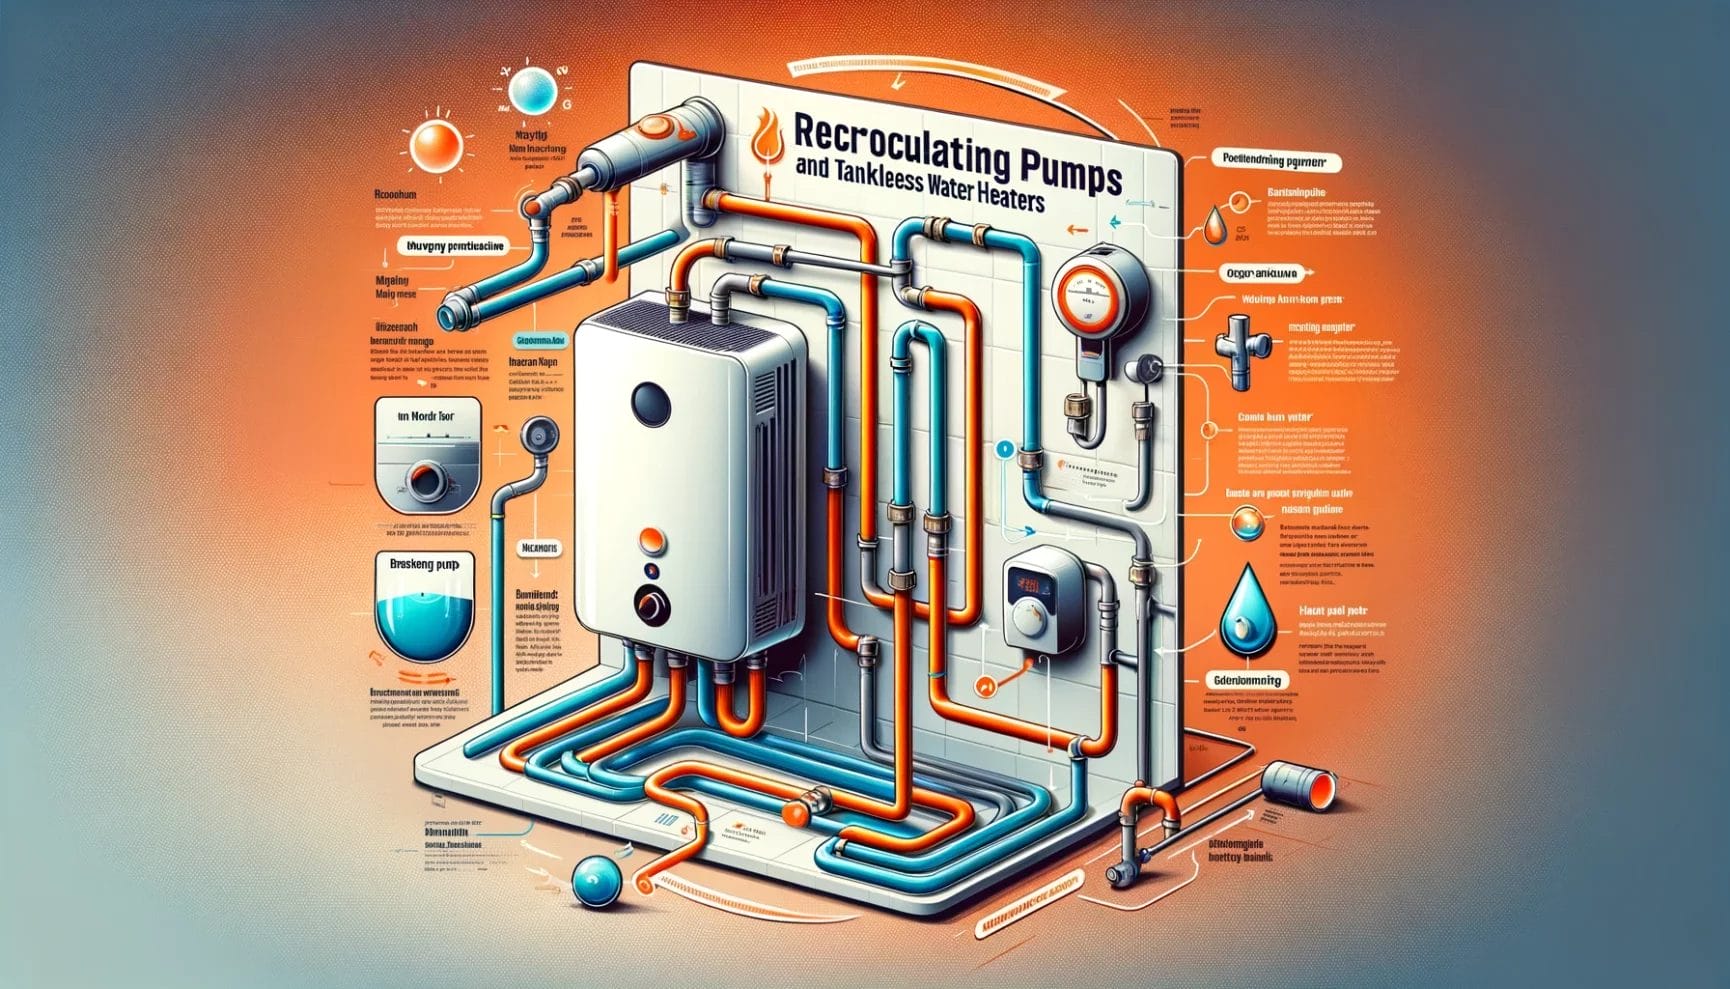 Illustration of a recirculating pump system with tankless water heaters and detailed labeled components.